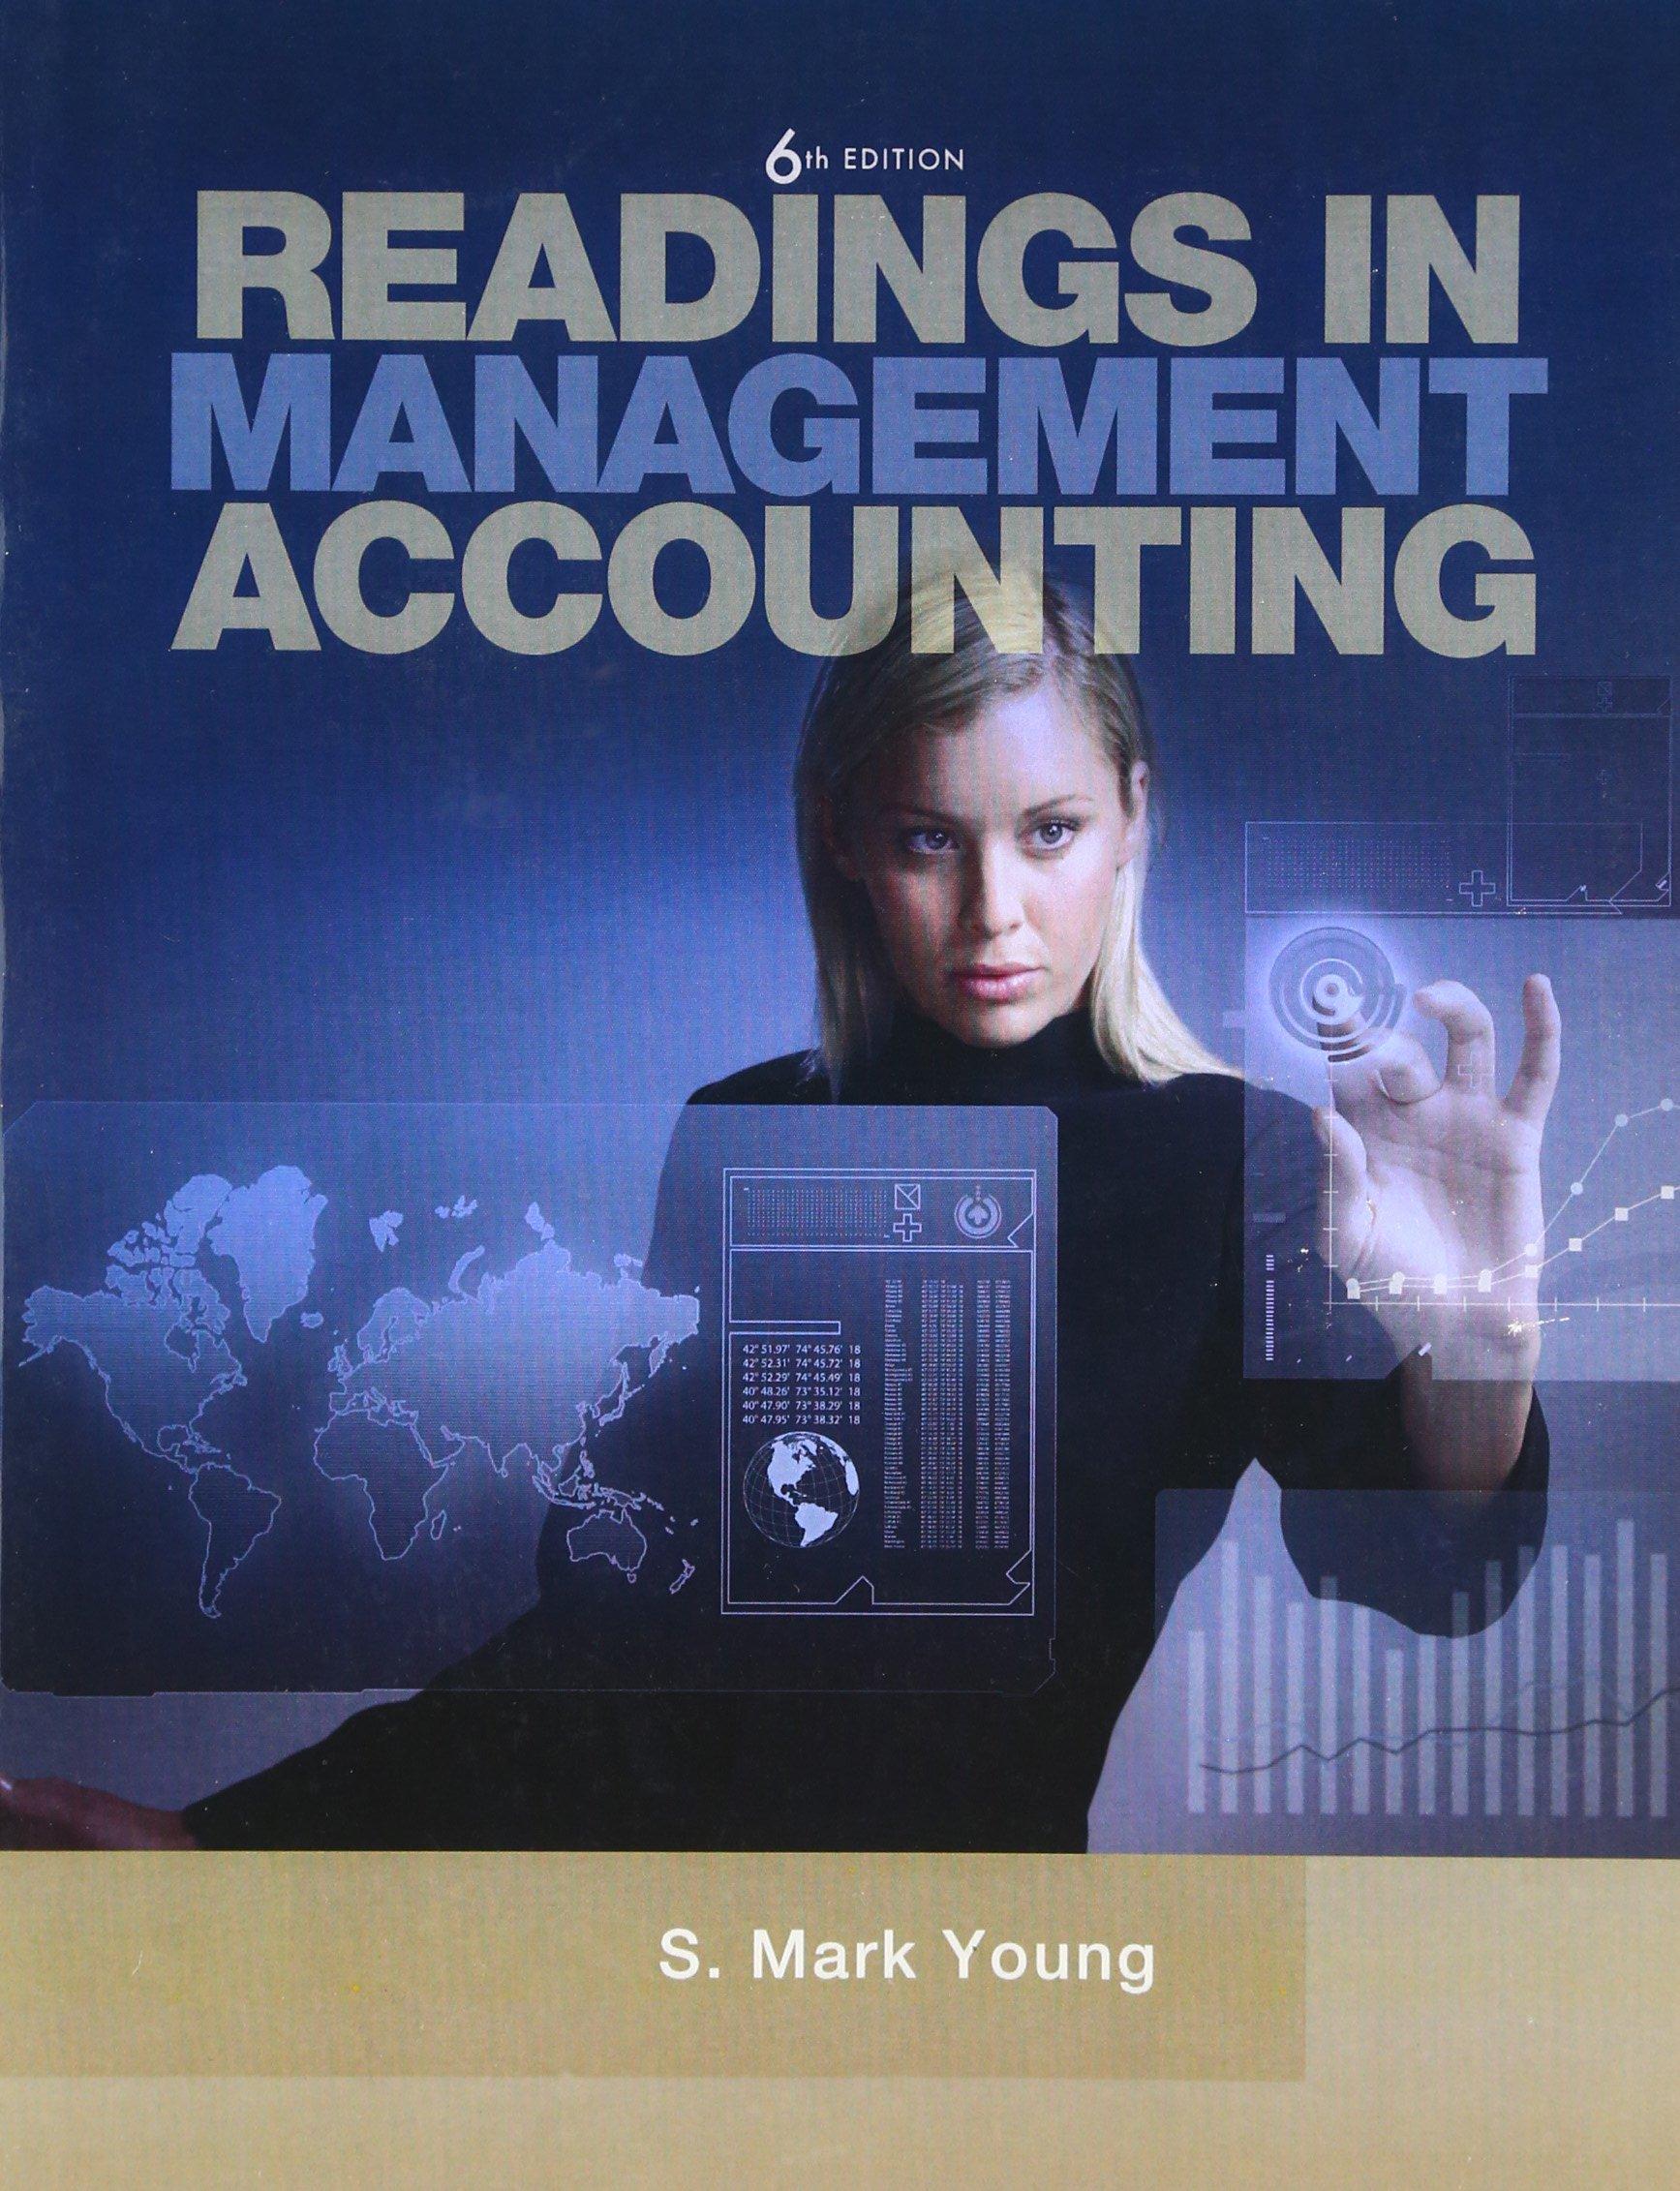 readings in management accounting 6th edition s. mark young 0137025033, 978-0137025039